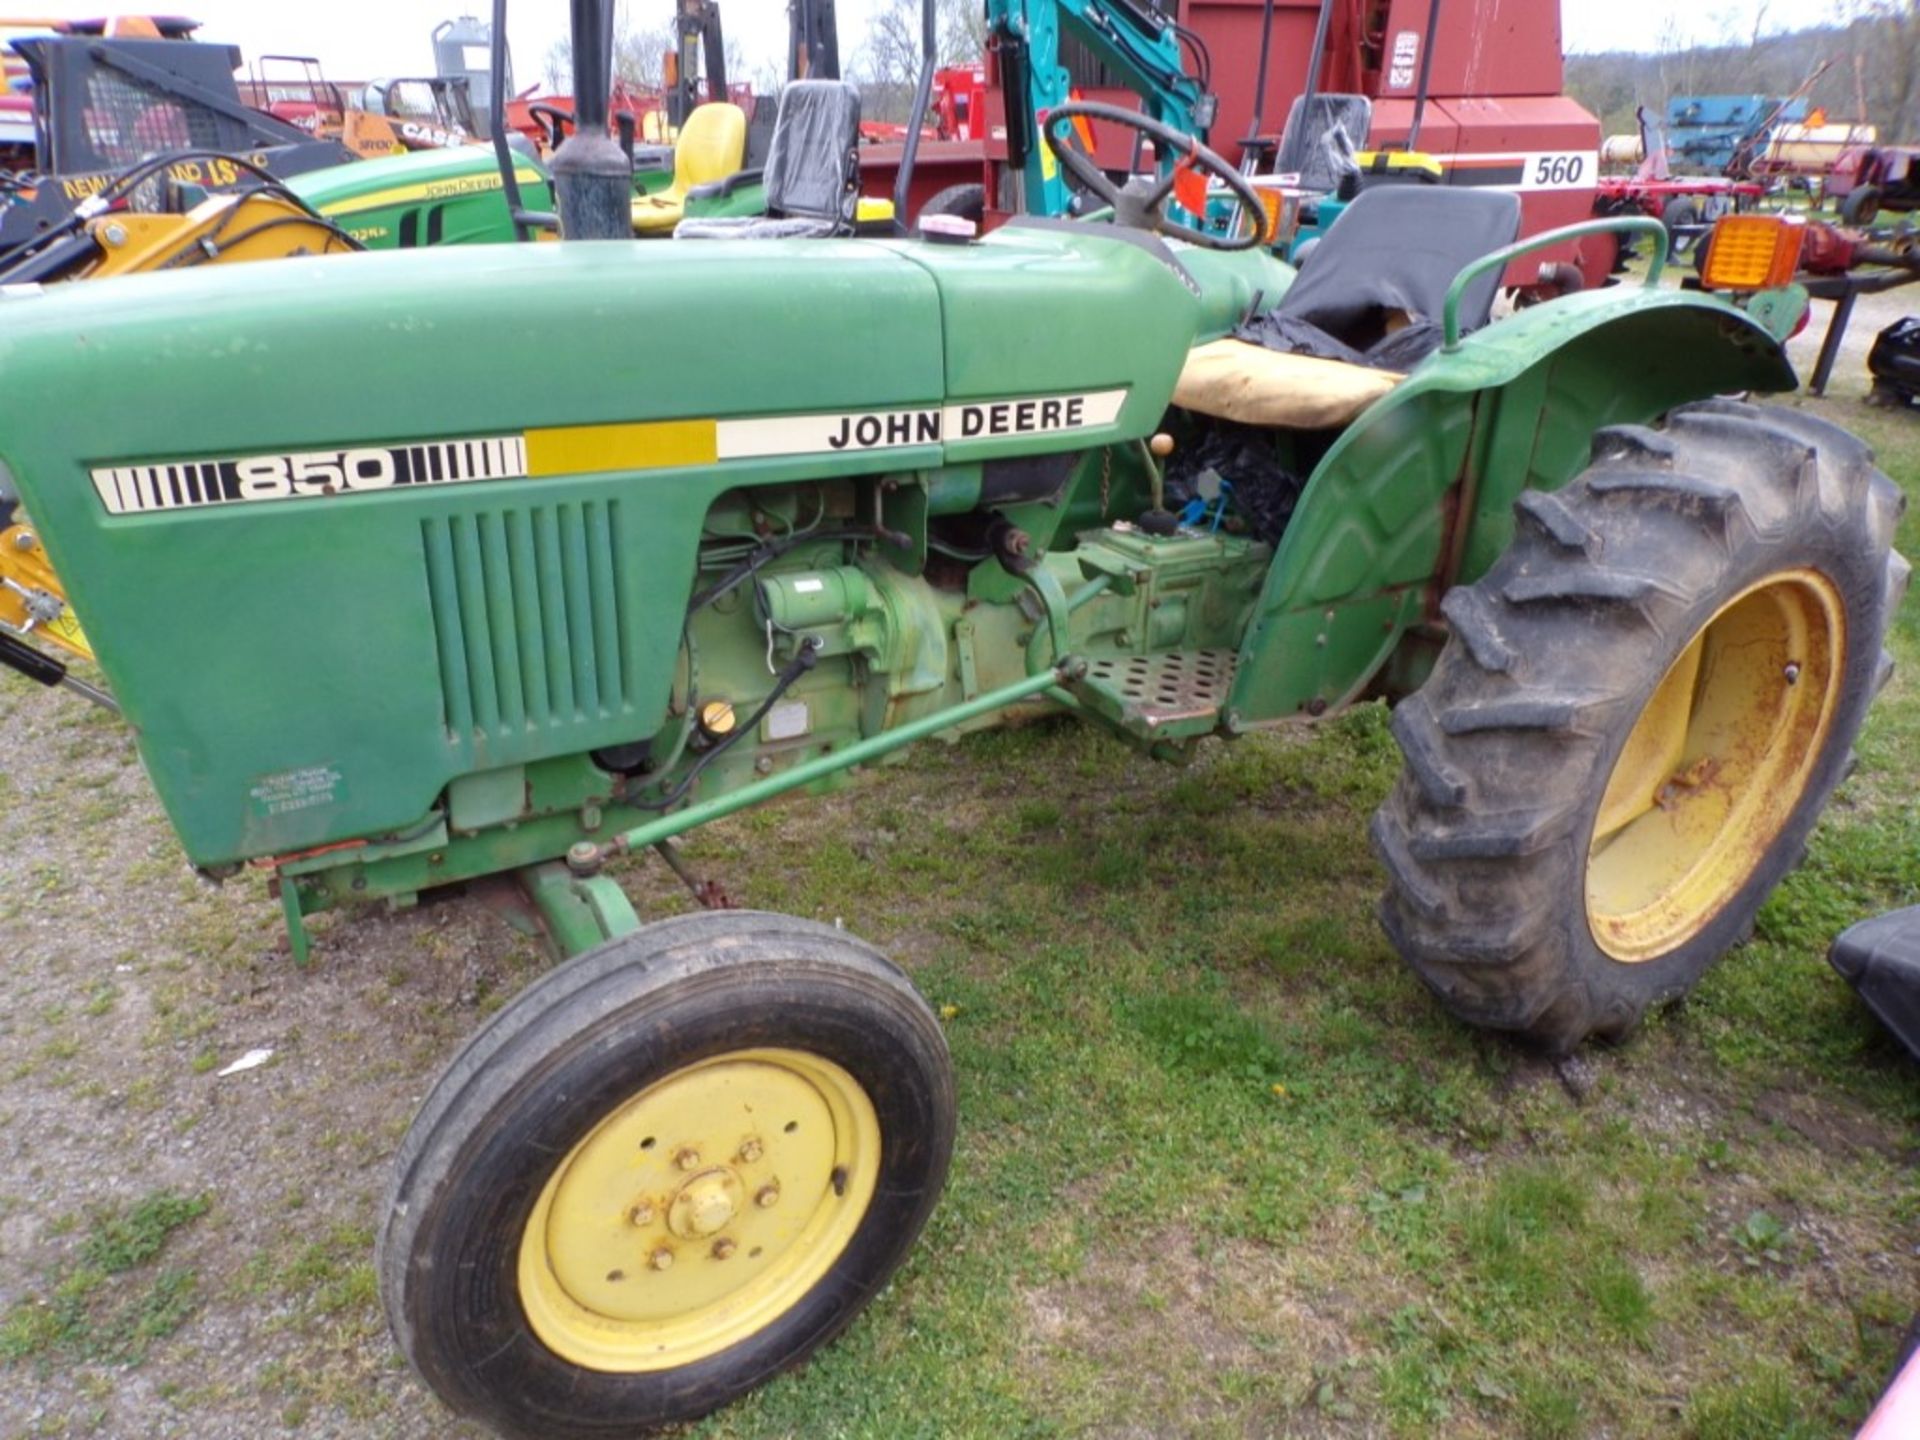 John Deere 850, 2 WD, Compact, 3 PT Hitch, 1912 Hours (5417) - Image 2 of 3